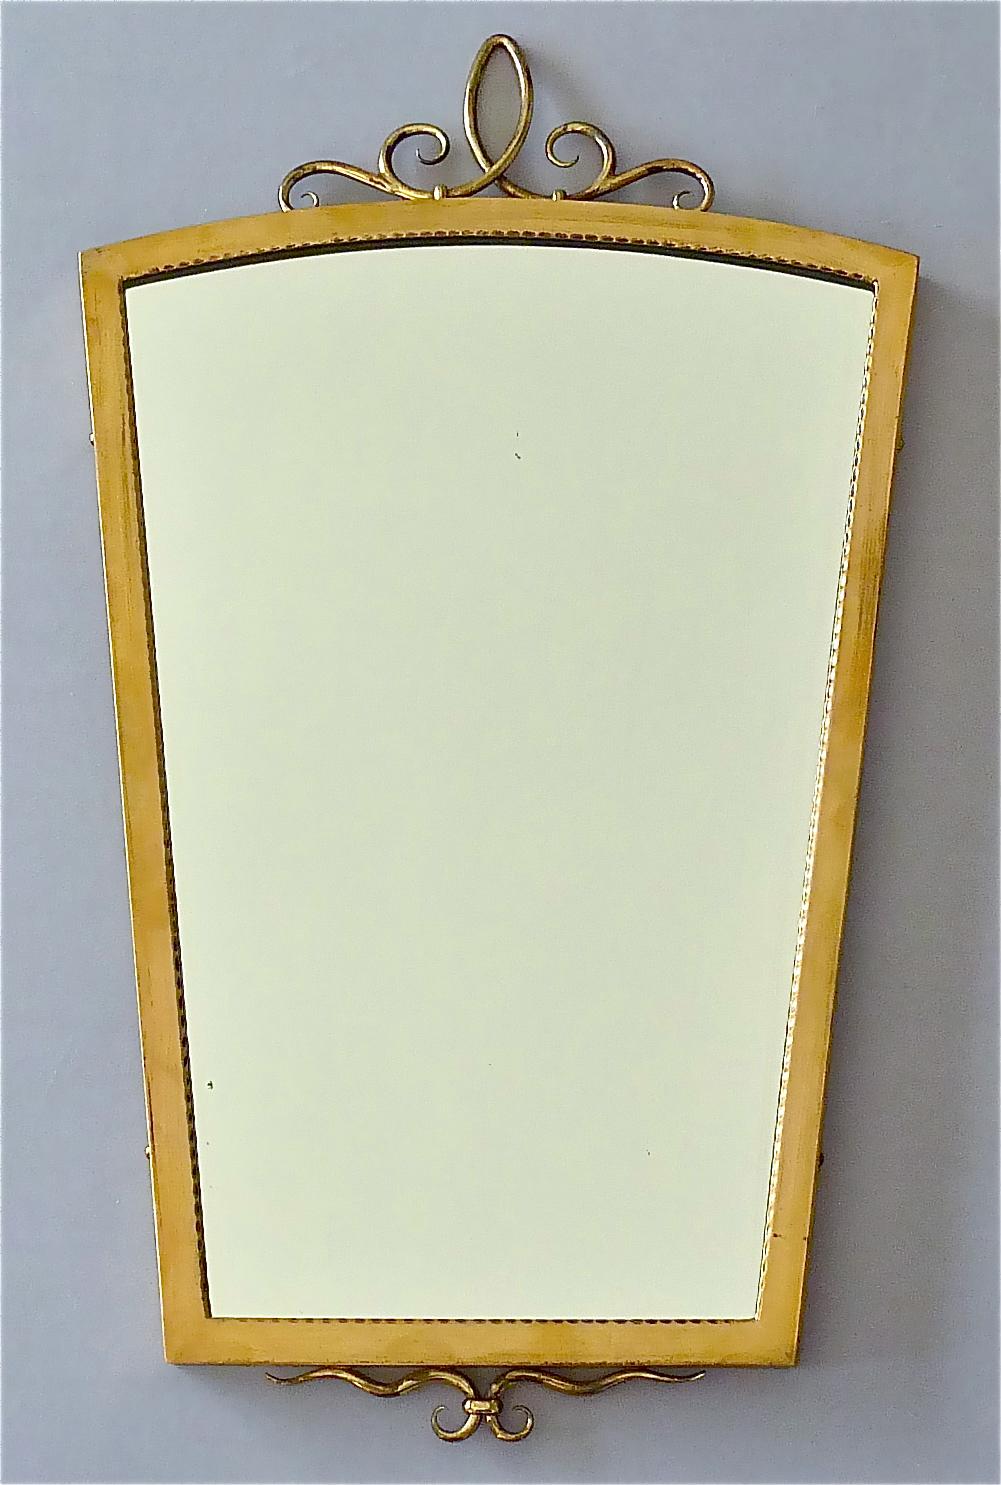 Rare Midcentury Gio Ponti style Italian wall mirror, Italy 1950s. The gorgeous vintage mirror is made of gilt brass and original mirror glass and has a beautiful upper and lower brass decoration very in the style of Gio Ponti. The old mirror stays